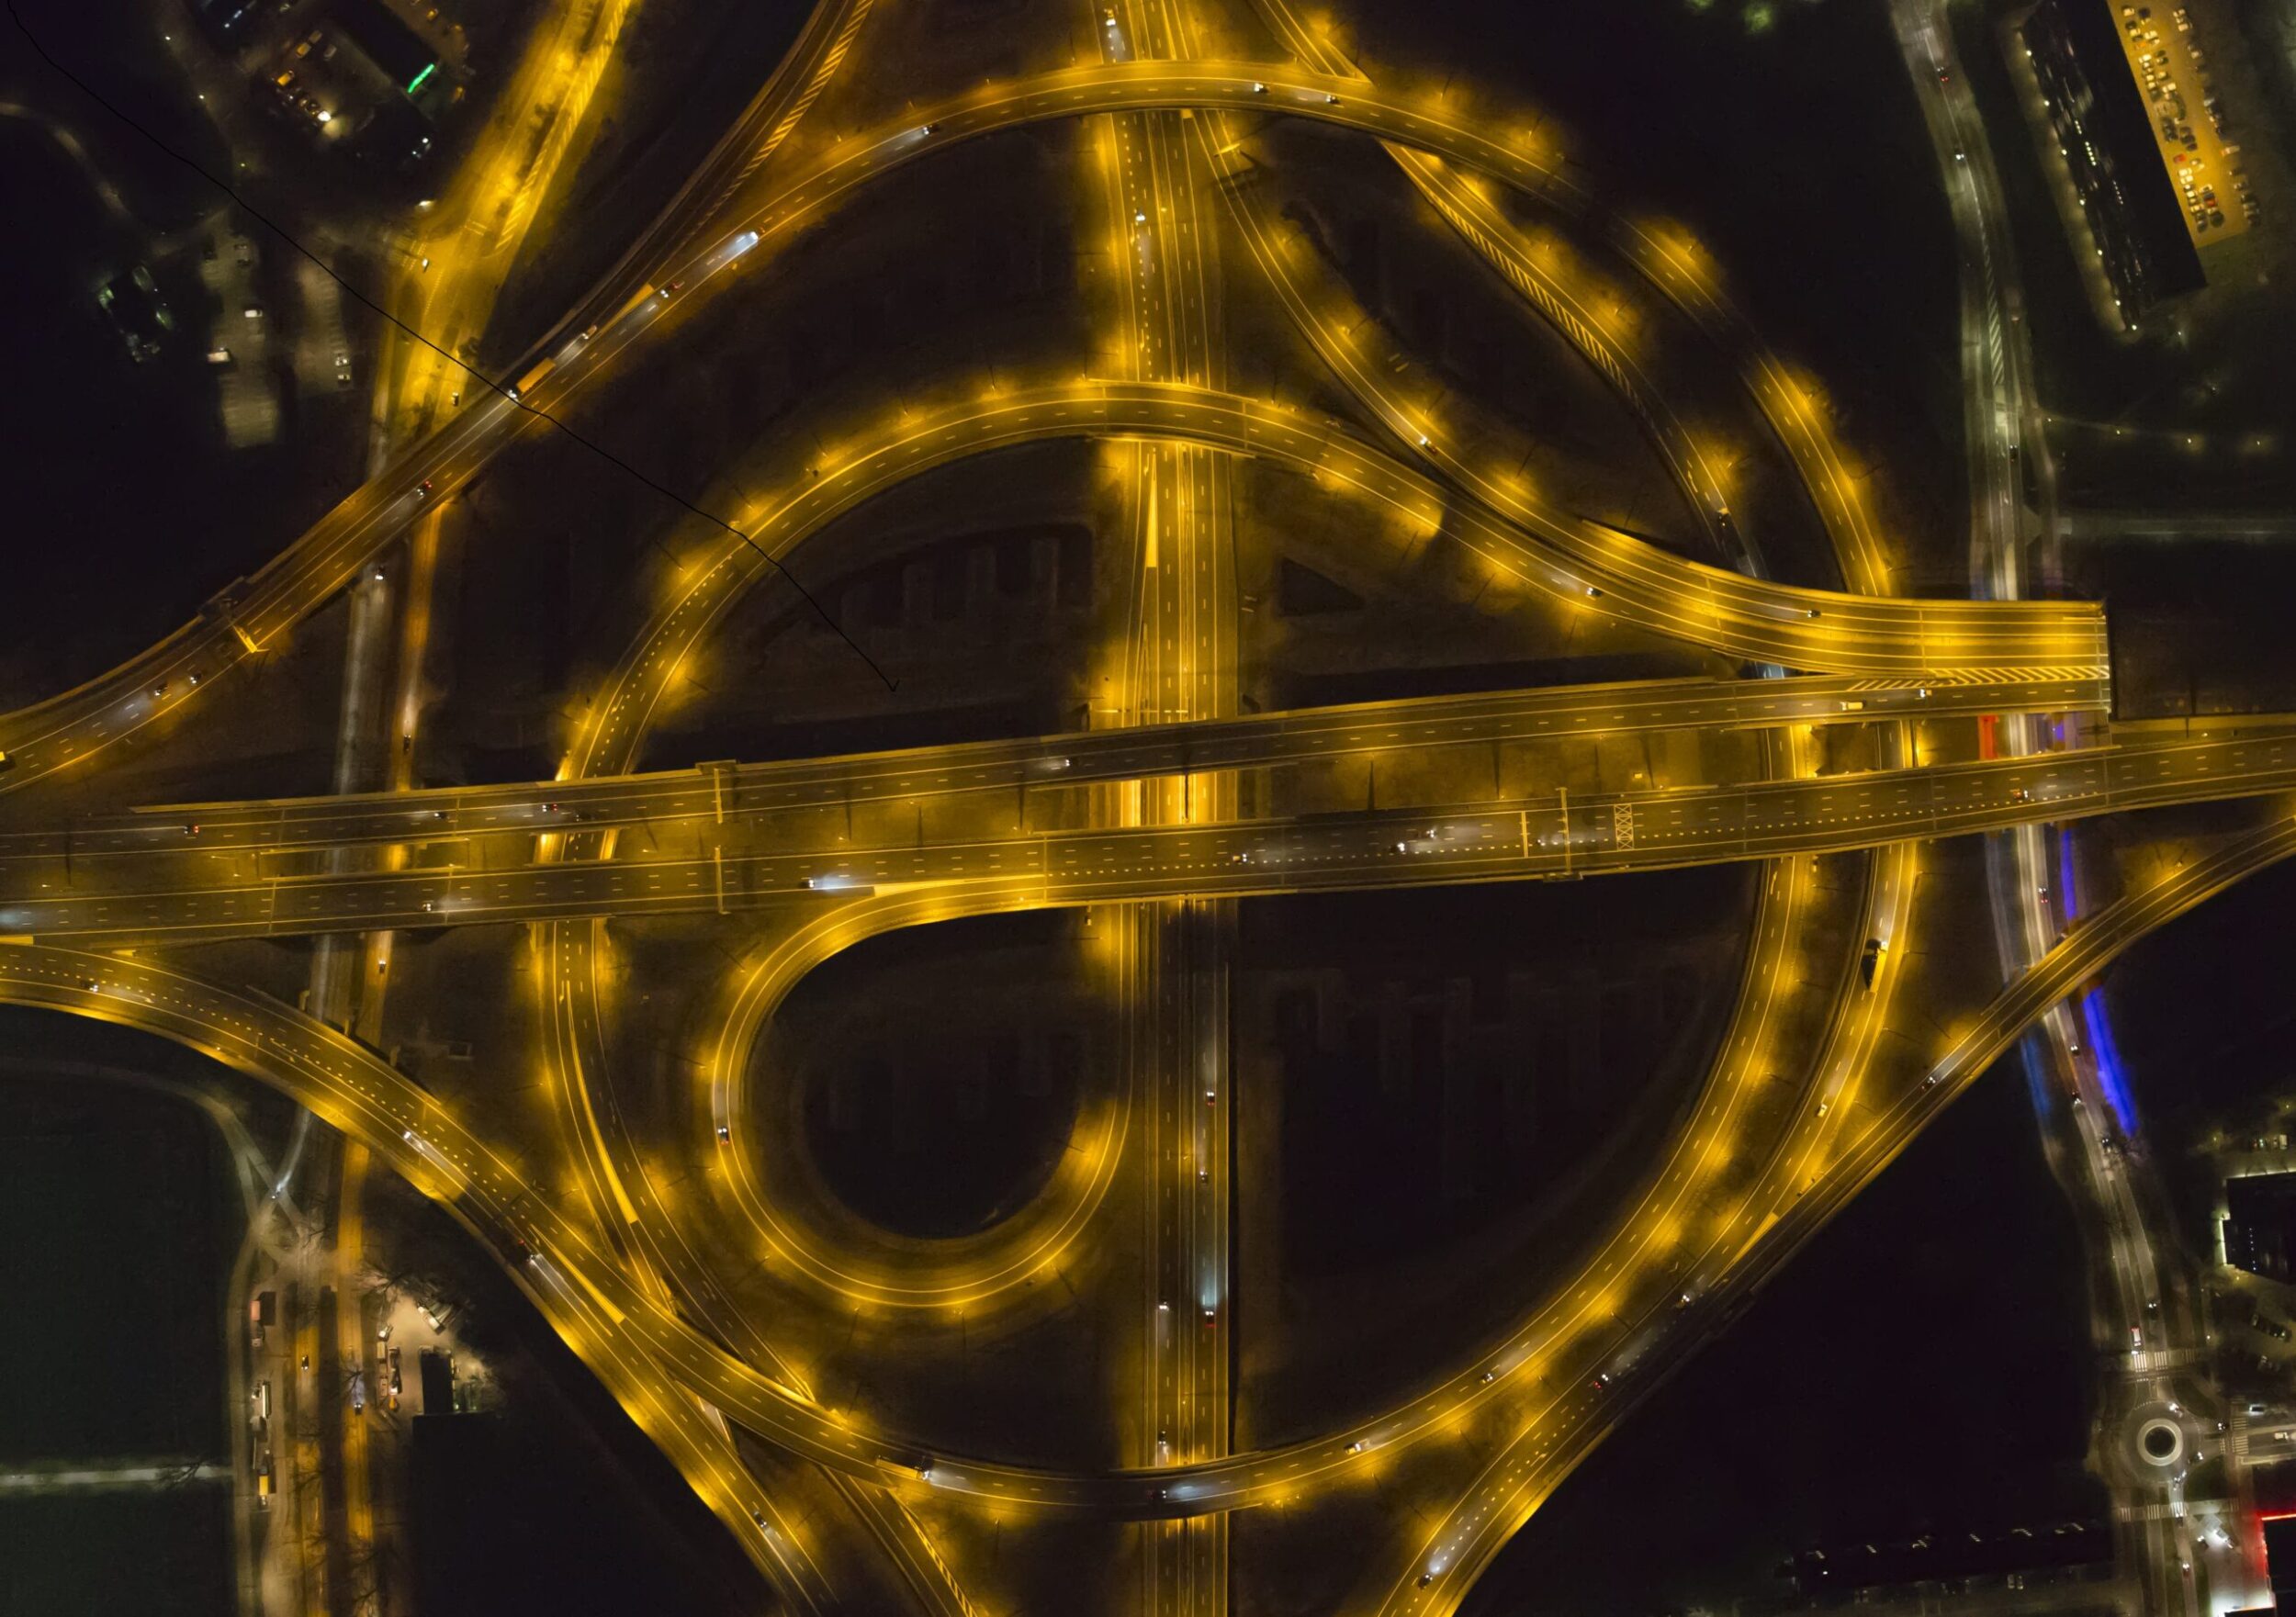 Aerial photography by night